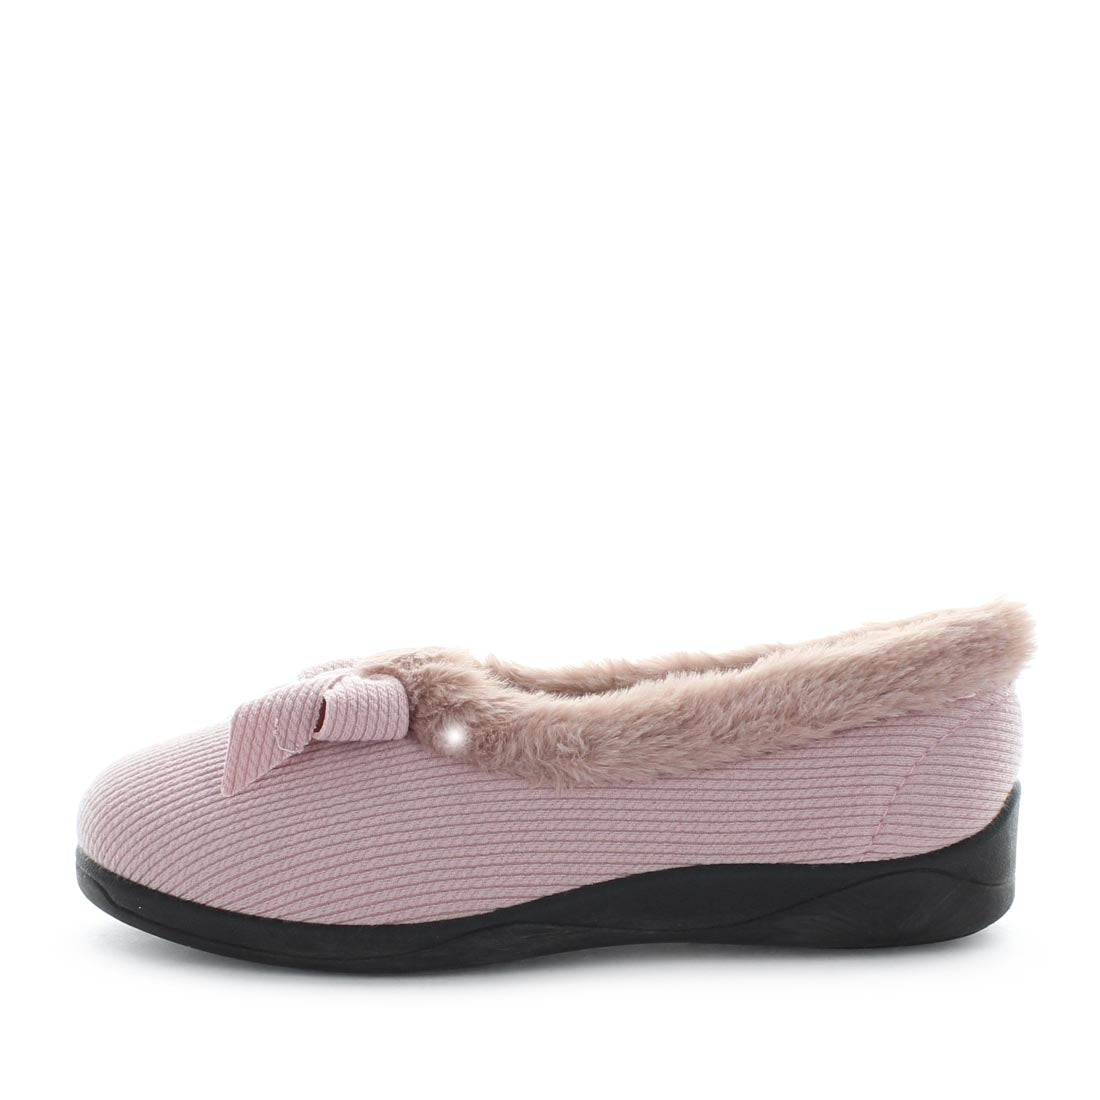 Load image into Gallery viewer, Electra by panda slippers, women&amp;#39;s slippers, women&amp;#39;s comfort slippers, Ballet slippers with a cute bow like feature, warm lining and sock with a flexible and durable outsole. women&amp;#39;s comfort warm slippers, ladies slippers
